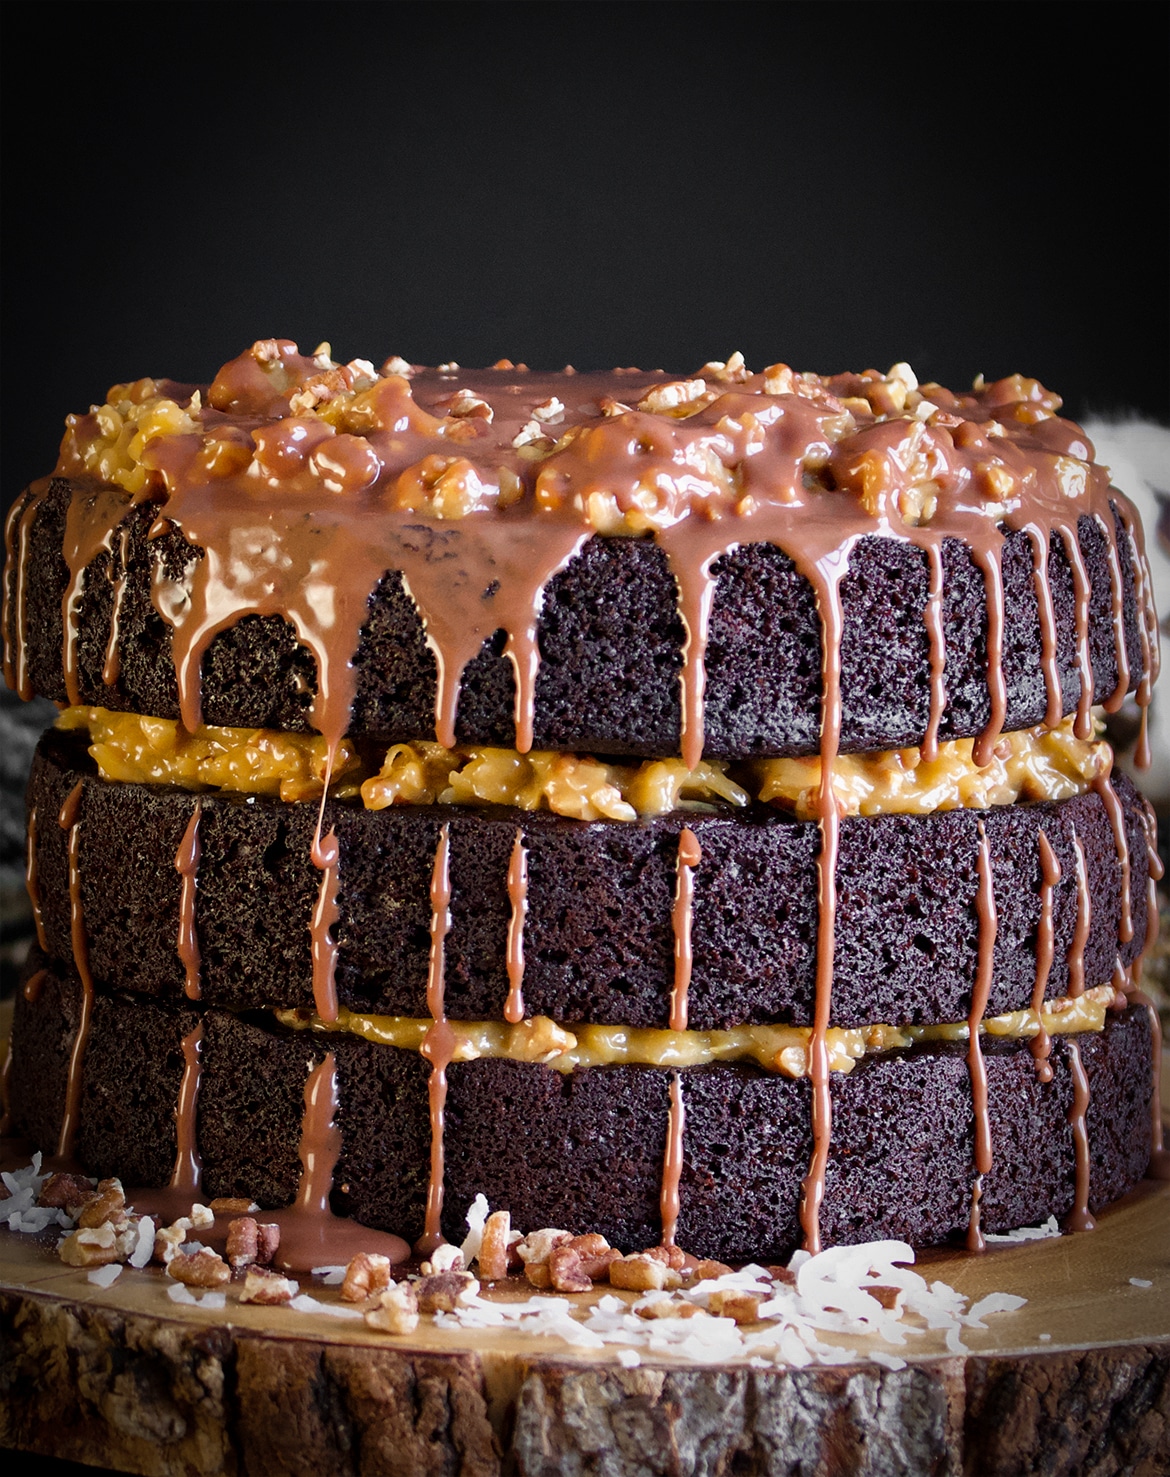 A three layer German Chocolate Cake made with Devil's Food Cake and topped with Chocolate Ganache.